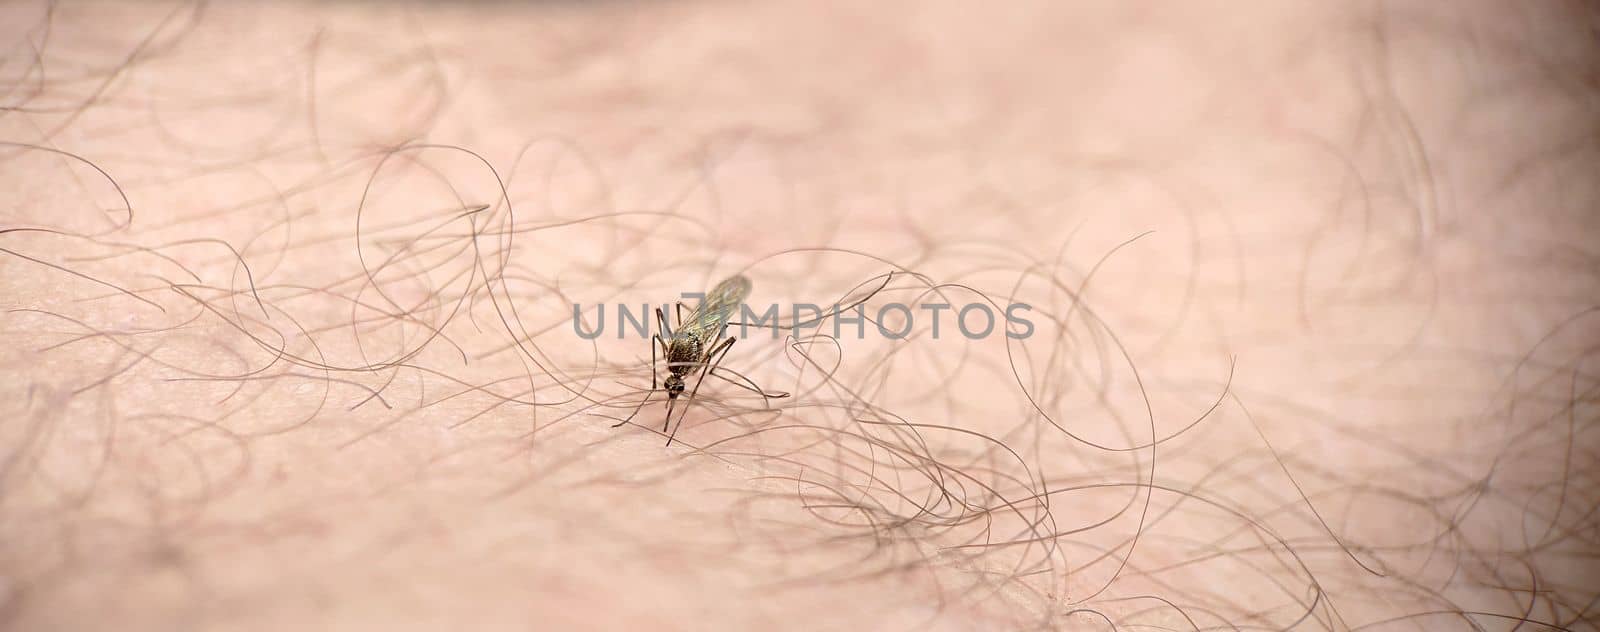 Striped mosquito drinks human blood close-up outdoors by Mastak80